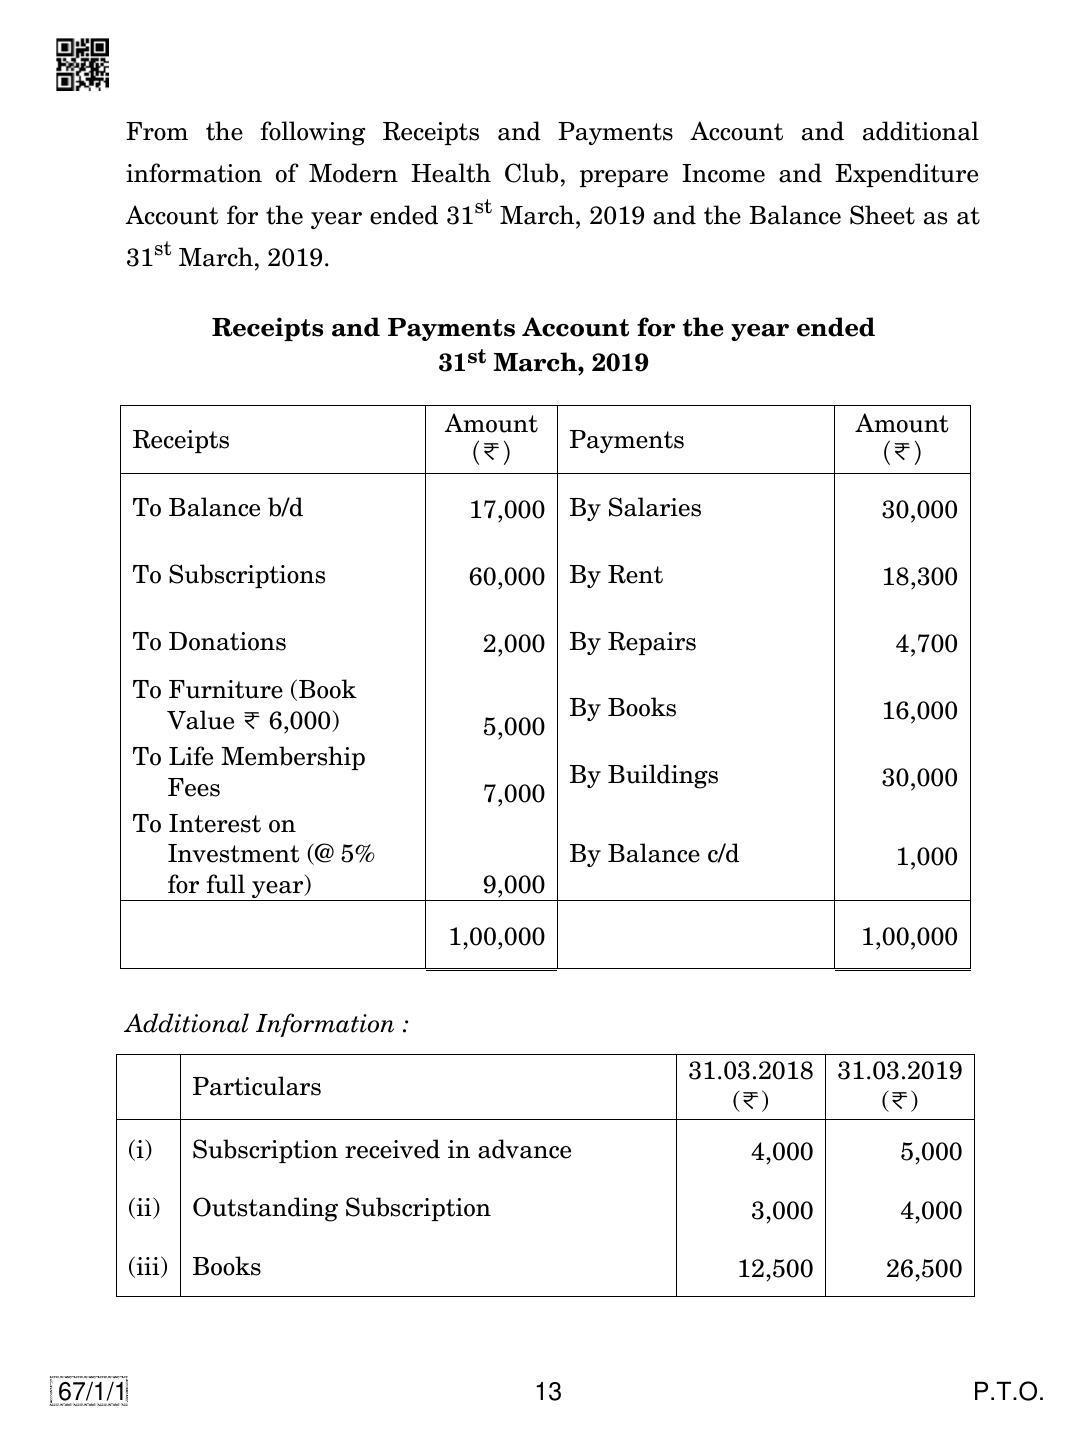 CBSE Class 12 67-1-1 ACCOUNTANCY 2019 Compartment Question Paper - Page 13